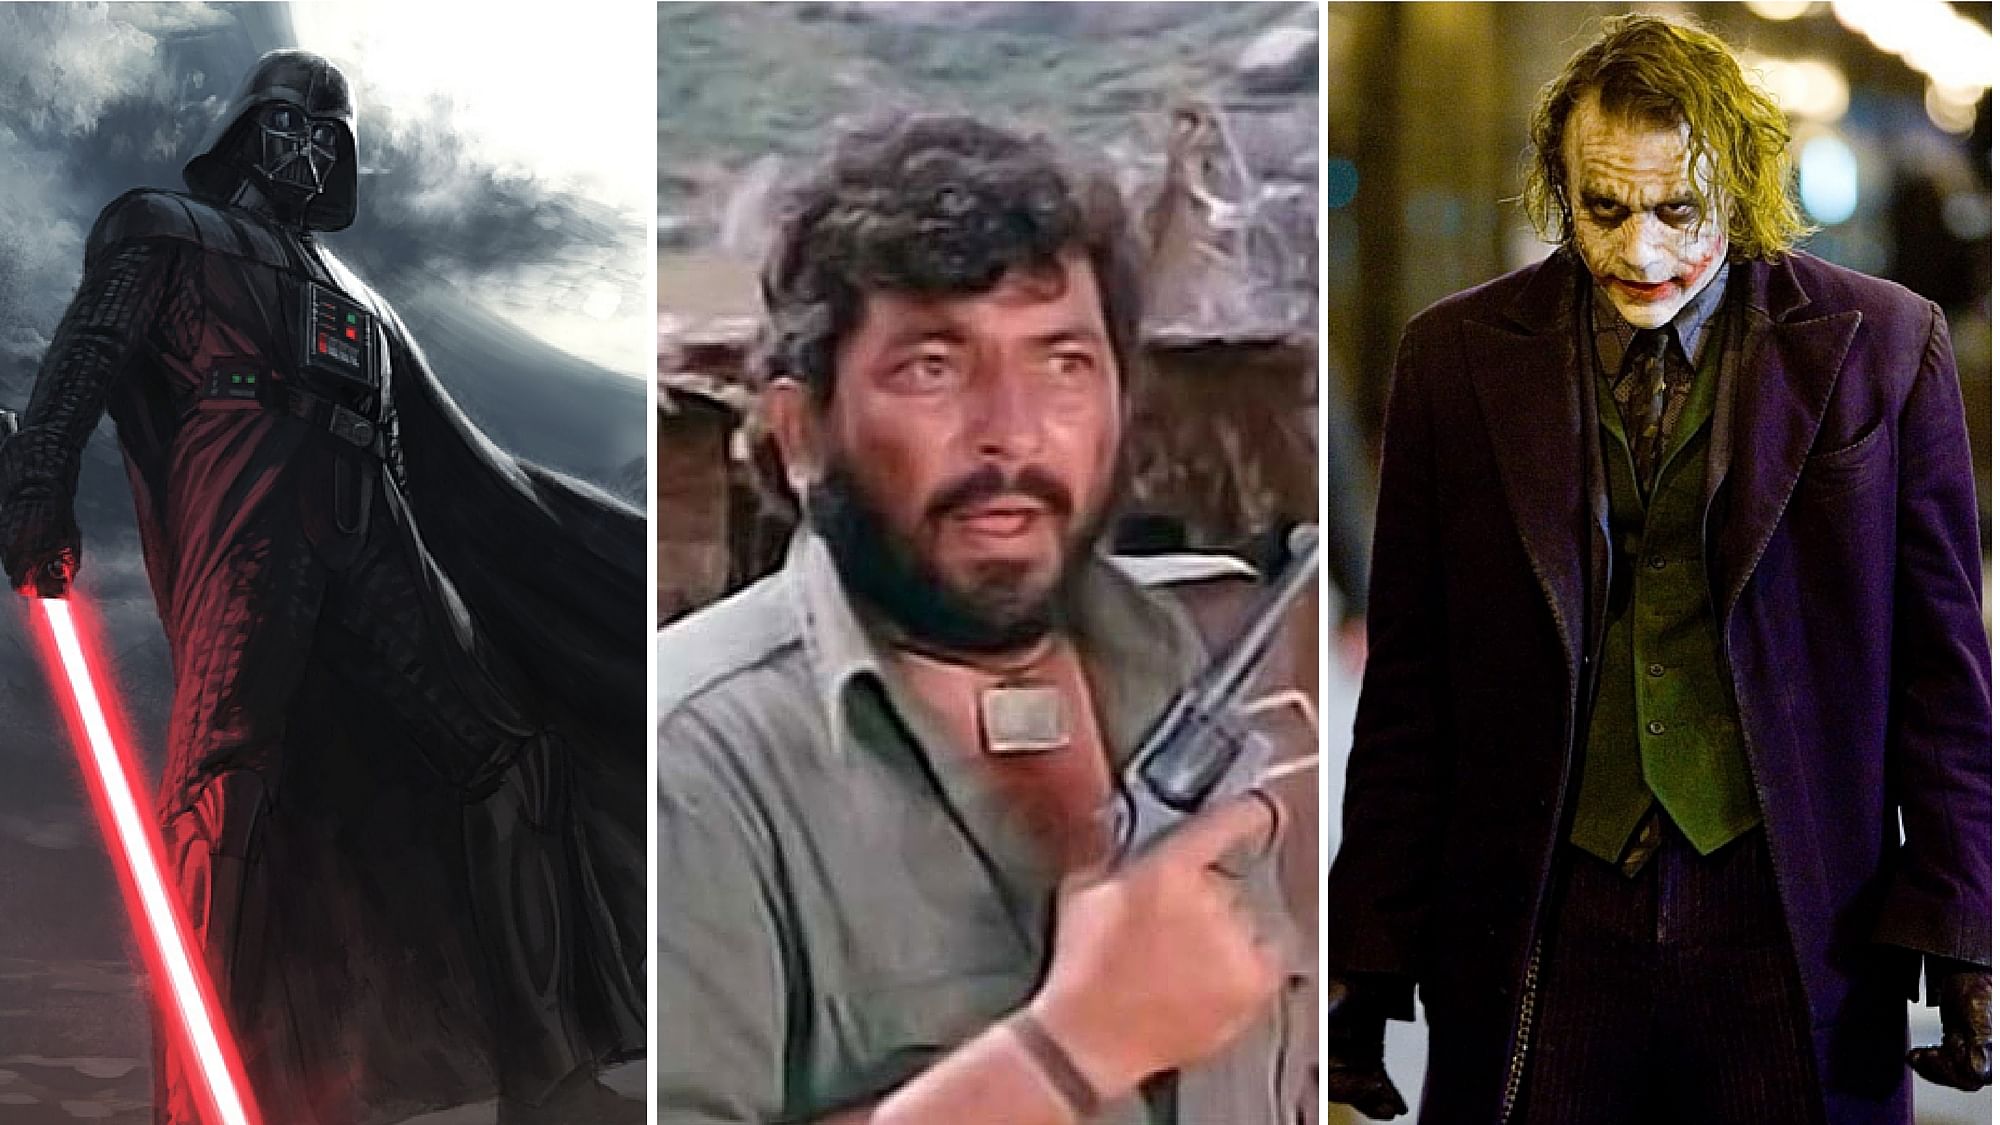 Pictured above: Darth Vader, Gabbar and The Joker – three of the last century’s most iconic cinematic villains. (Photo: The Quint)